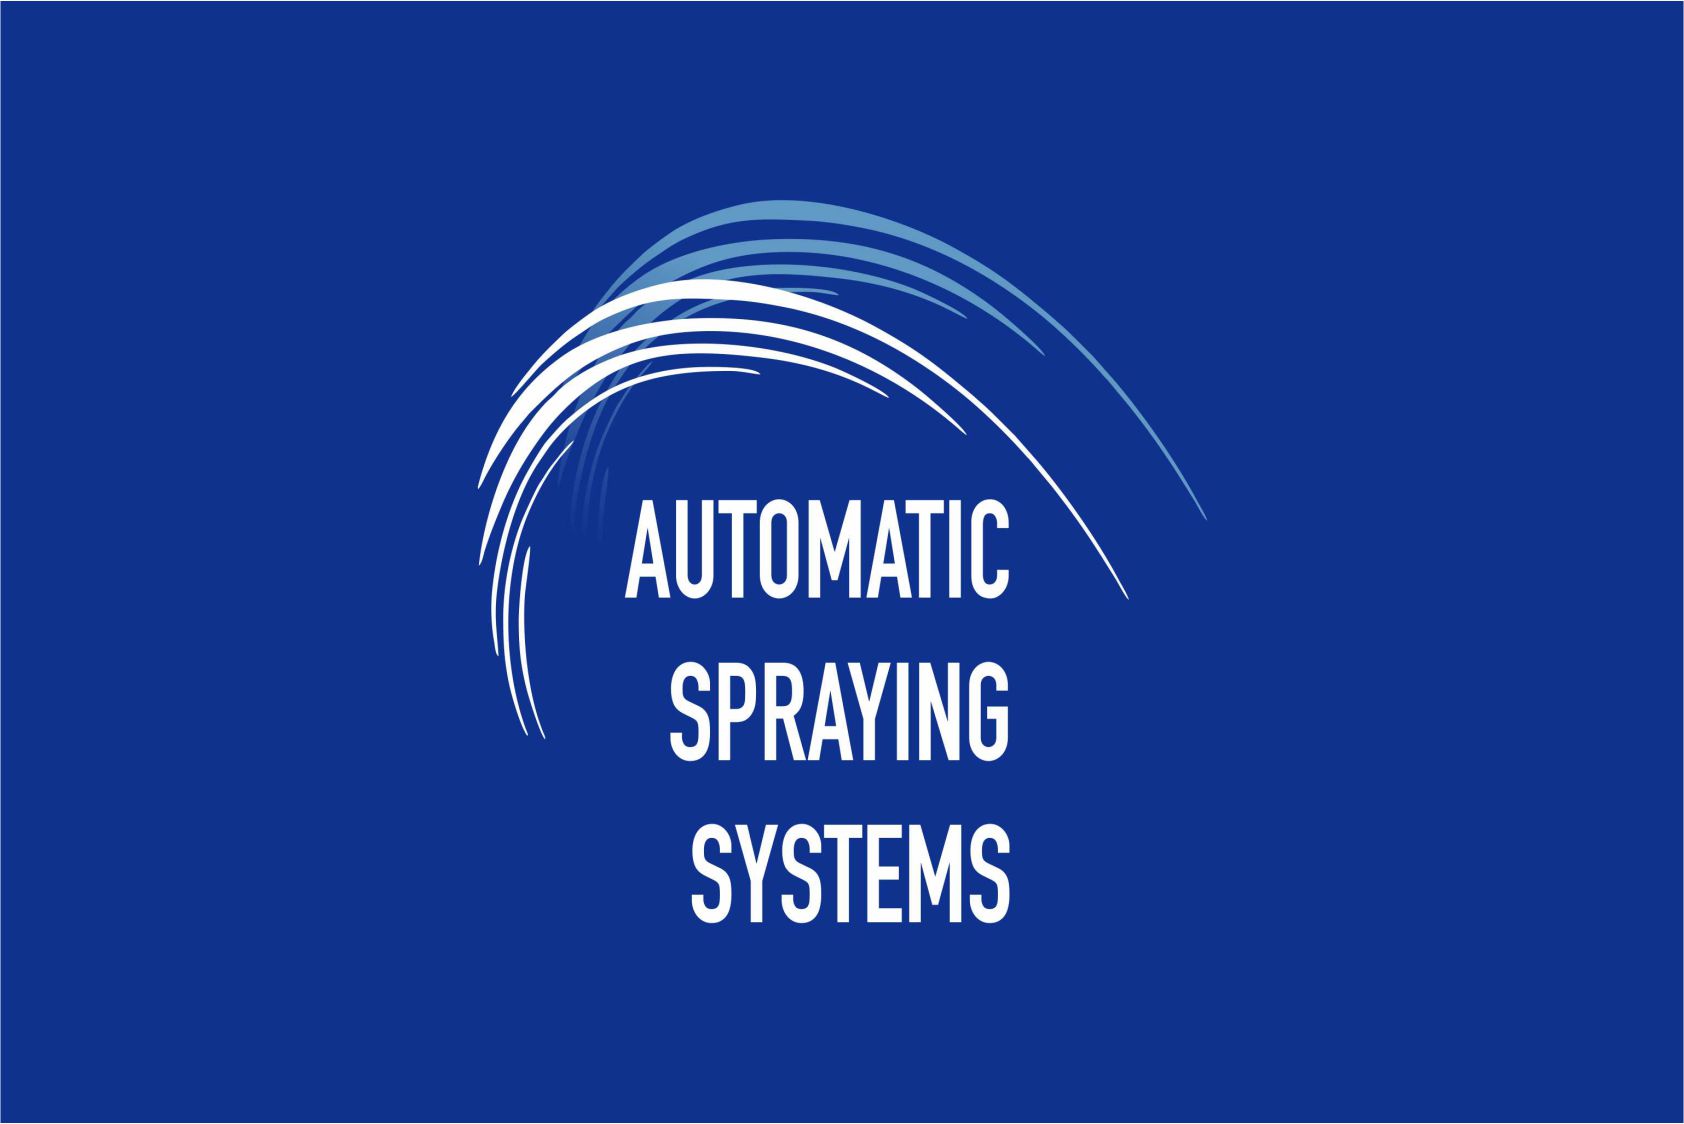 Automatic spraying systems